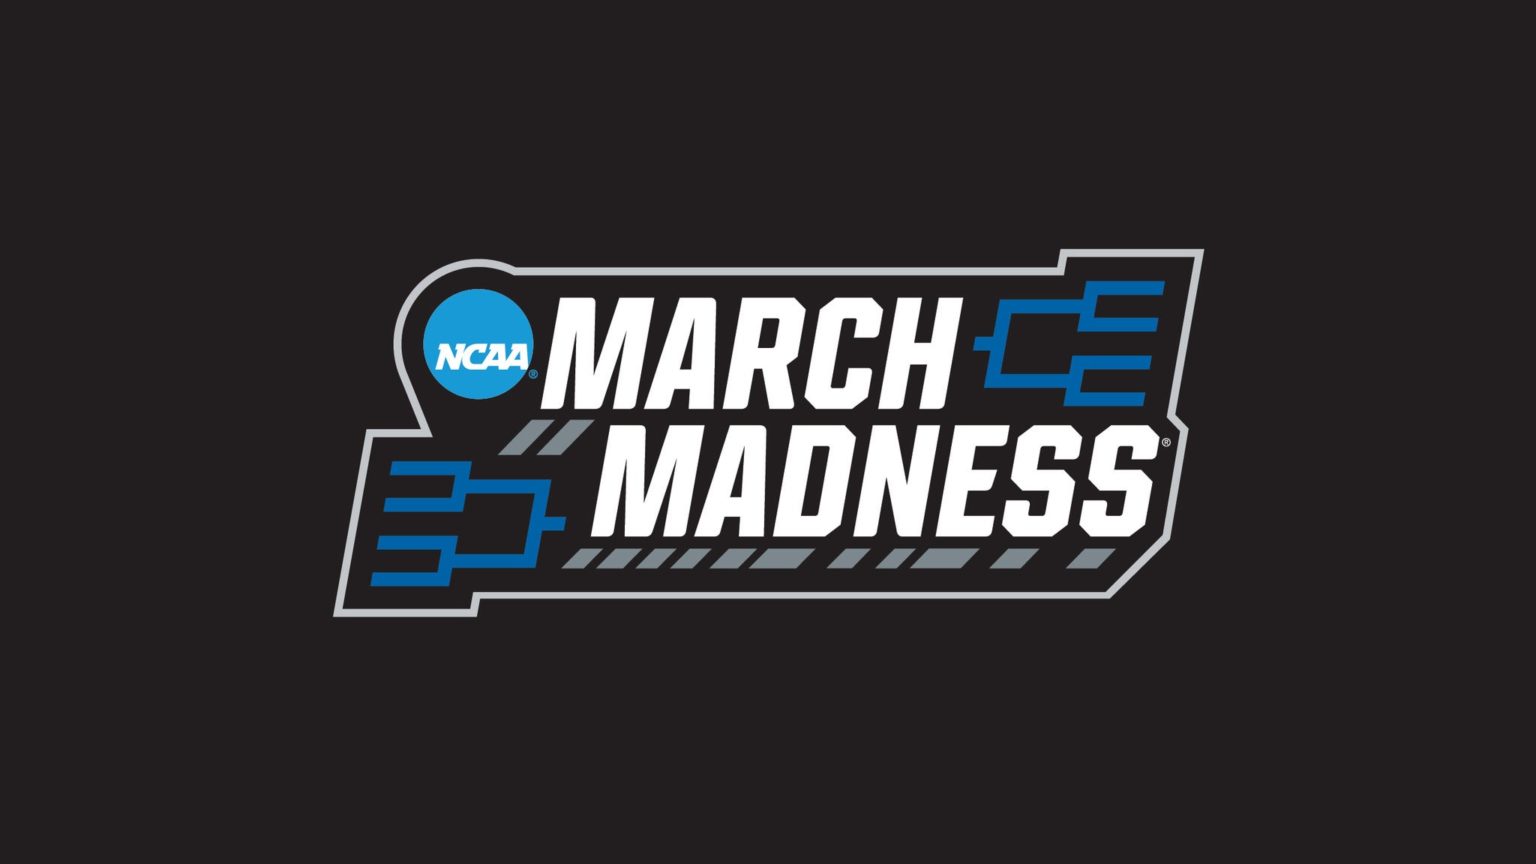 March madness 2023